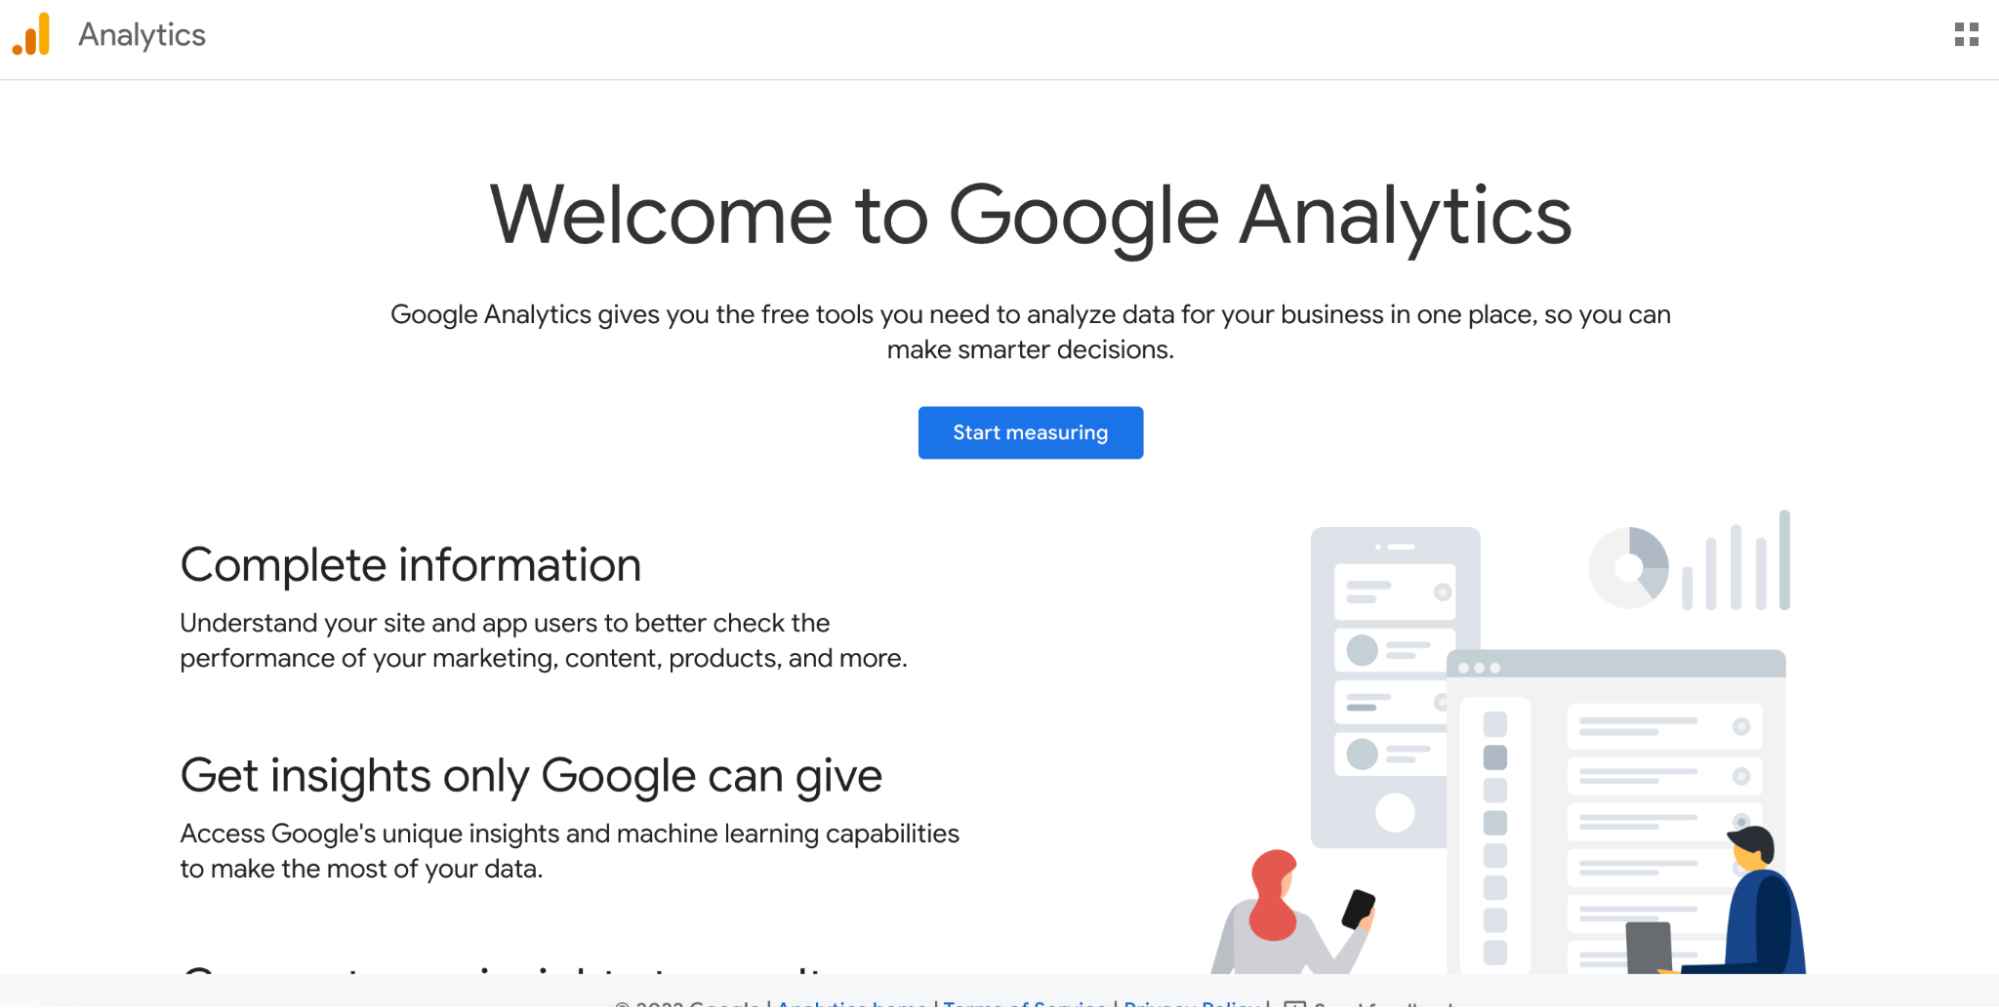 The homepage for Google Analytics